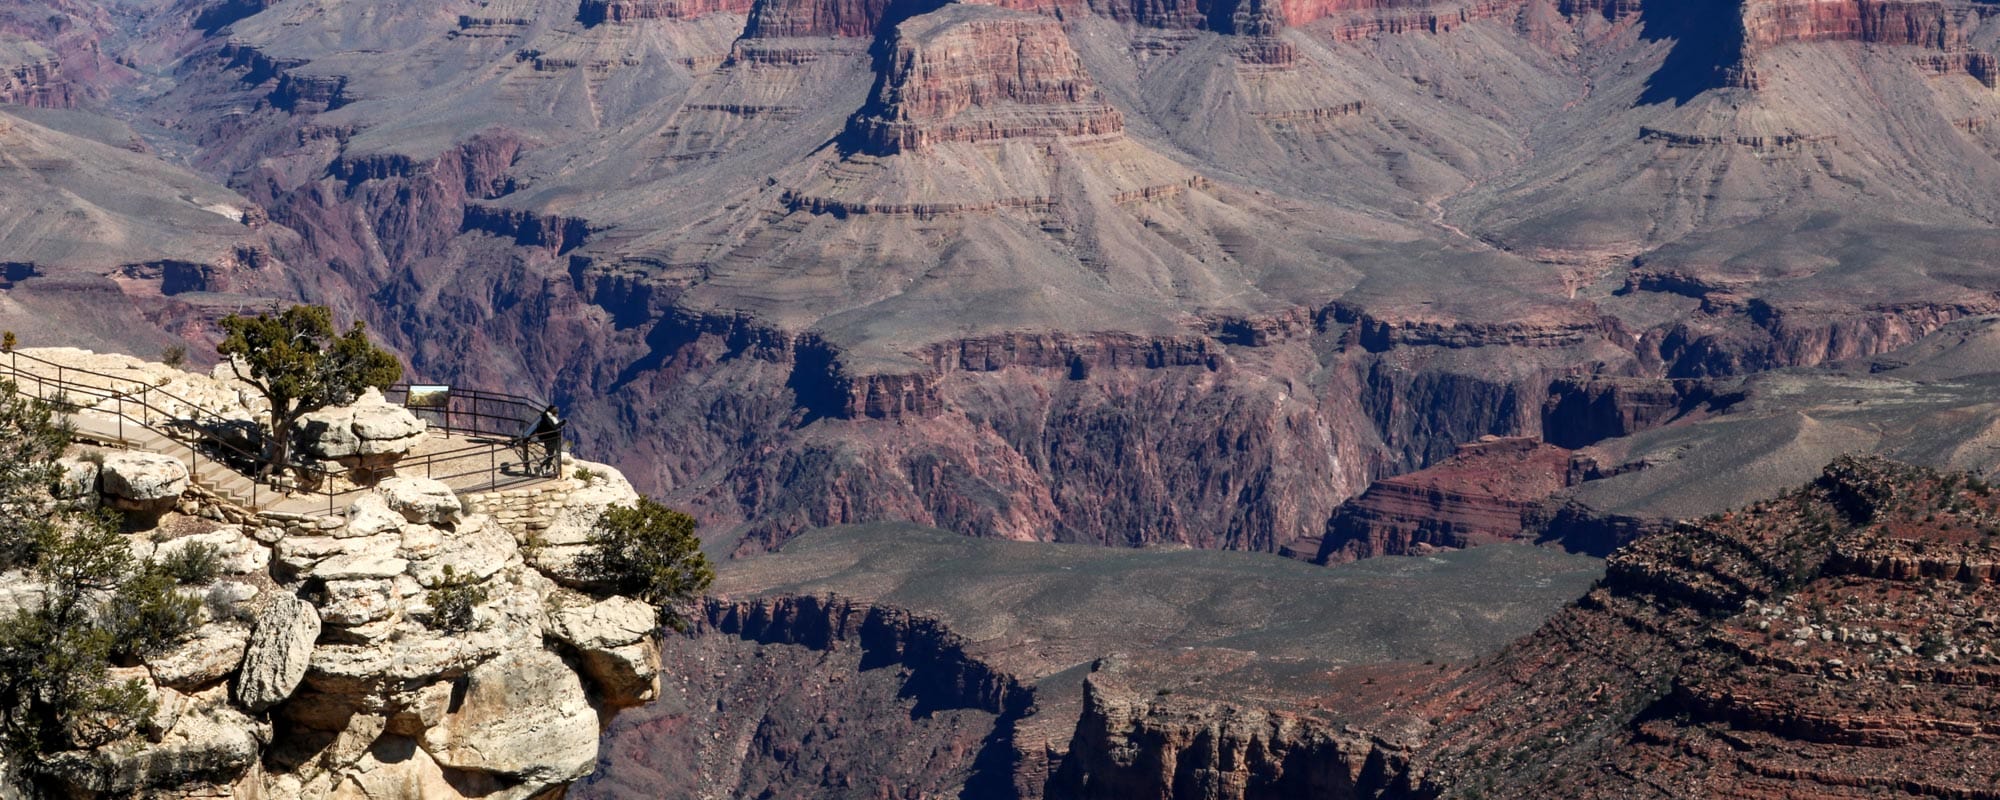 Trailview Overlook in Grand Canyon National Park, Arizona, greatest viewpoints in national parks